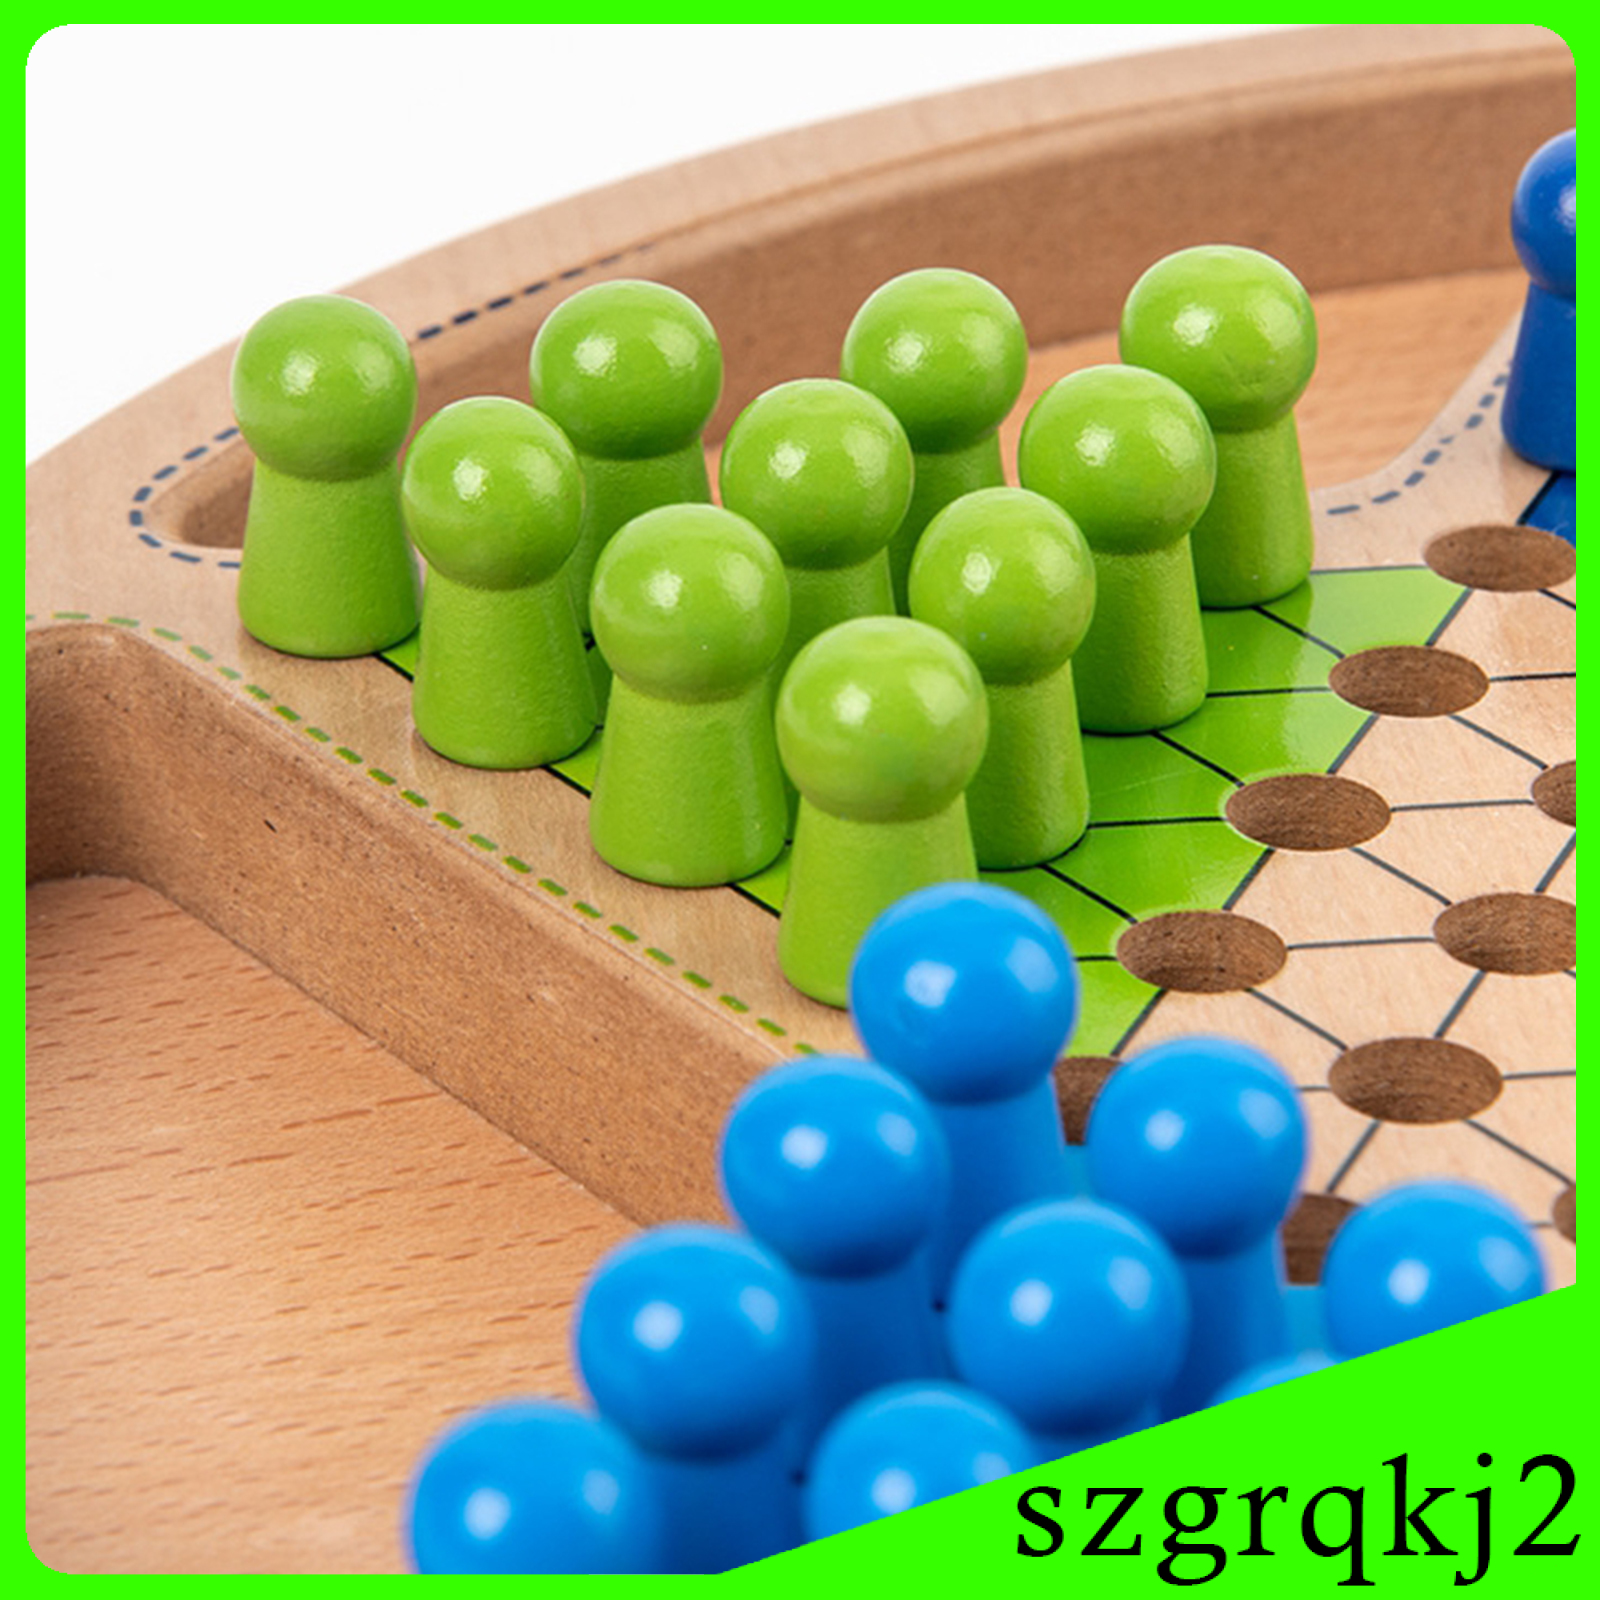 Newest 2 in 1 Wooden Chinese Checkers Board Game Set with Colorful Pegs Style1